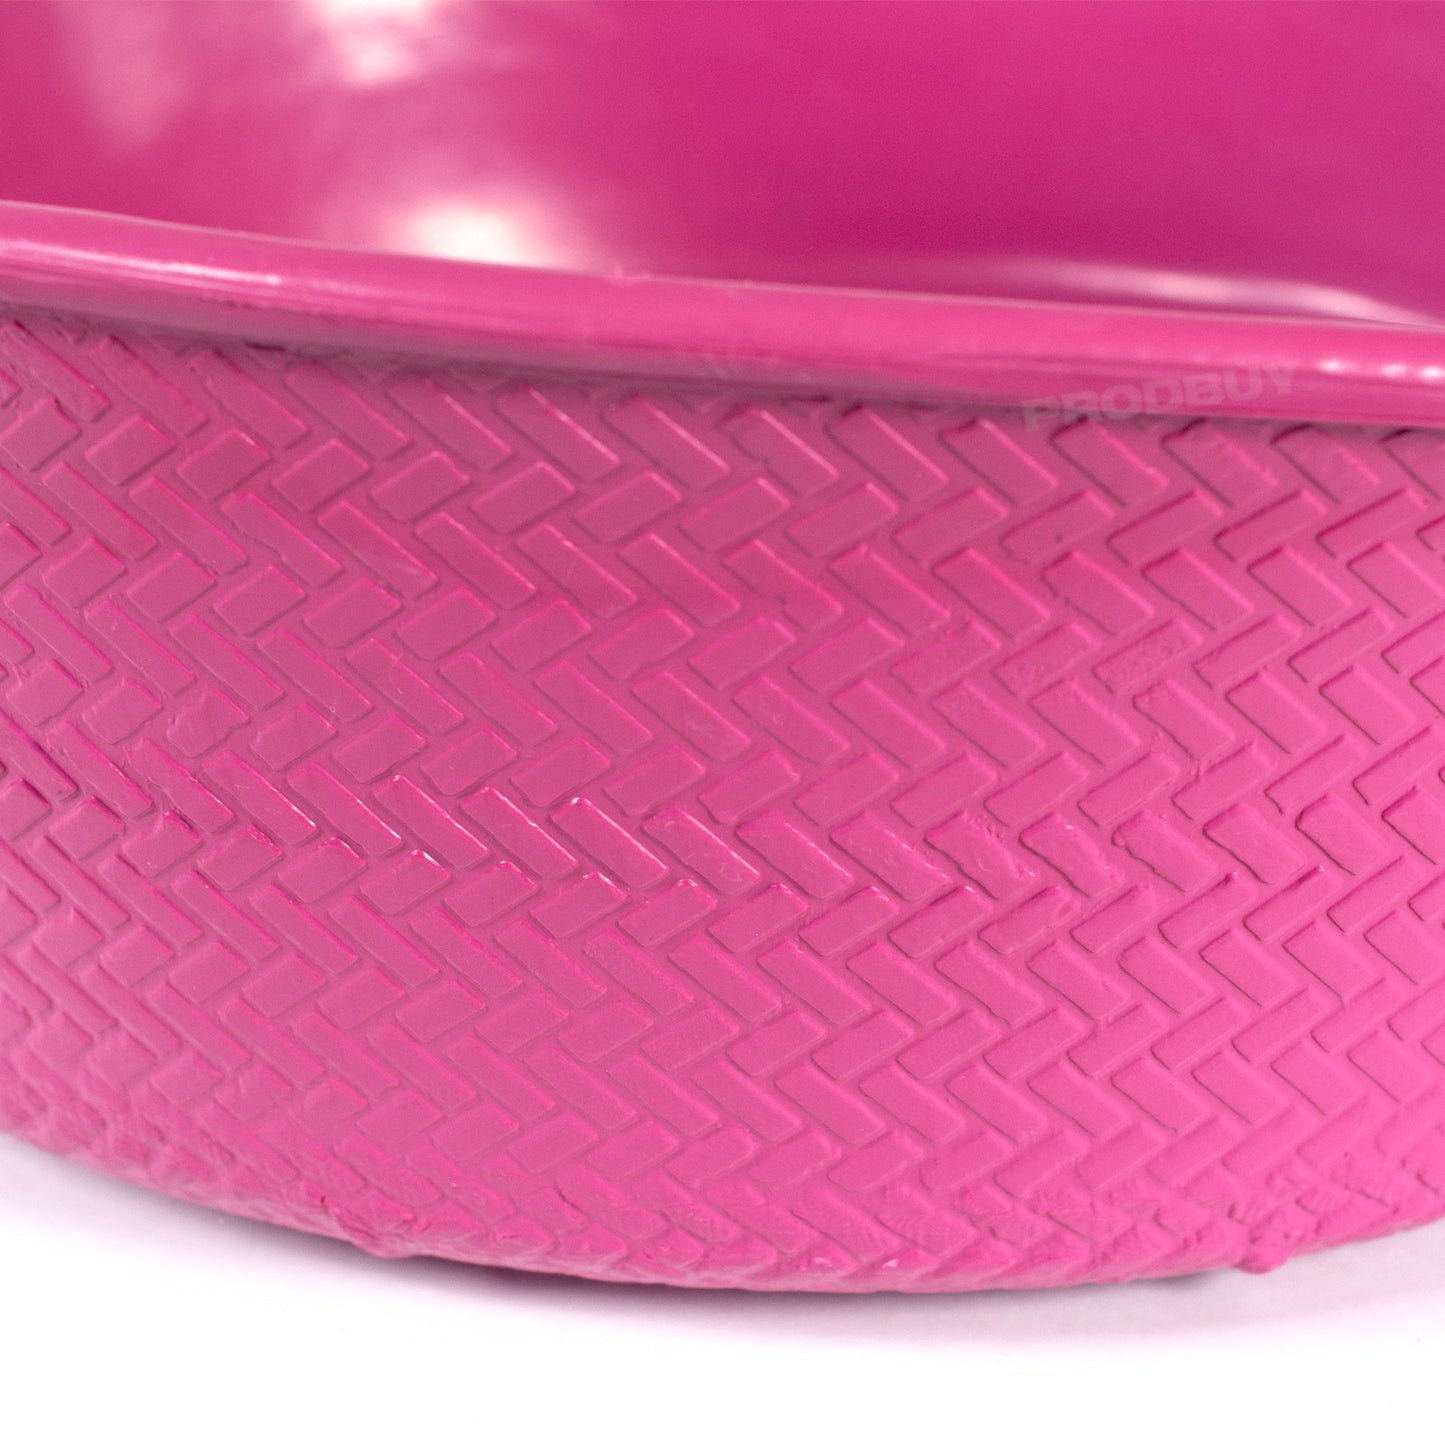 20 Litre Pink Rubber Eco Skip Feeder with Handles